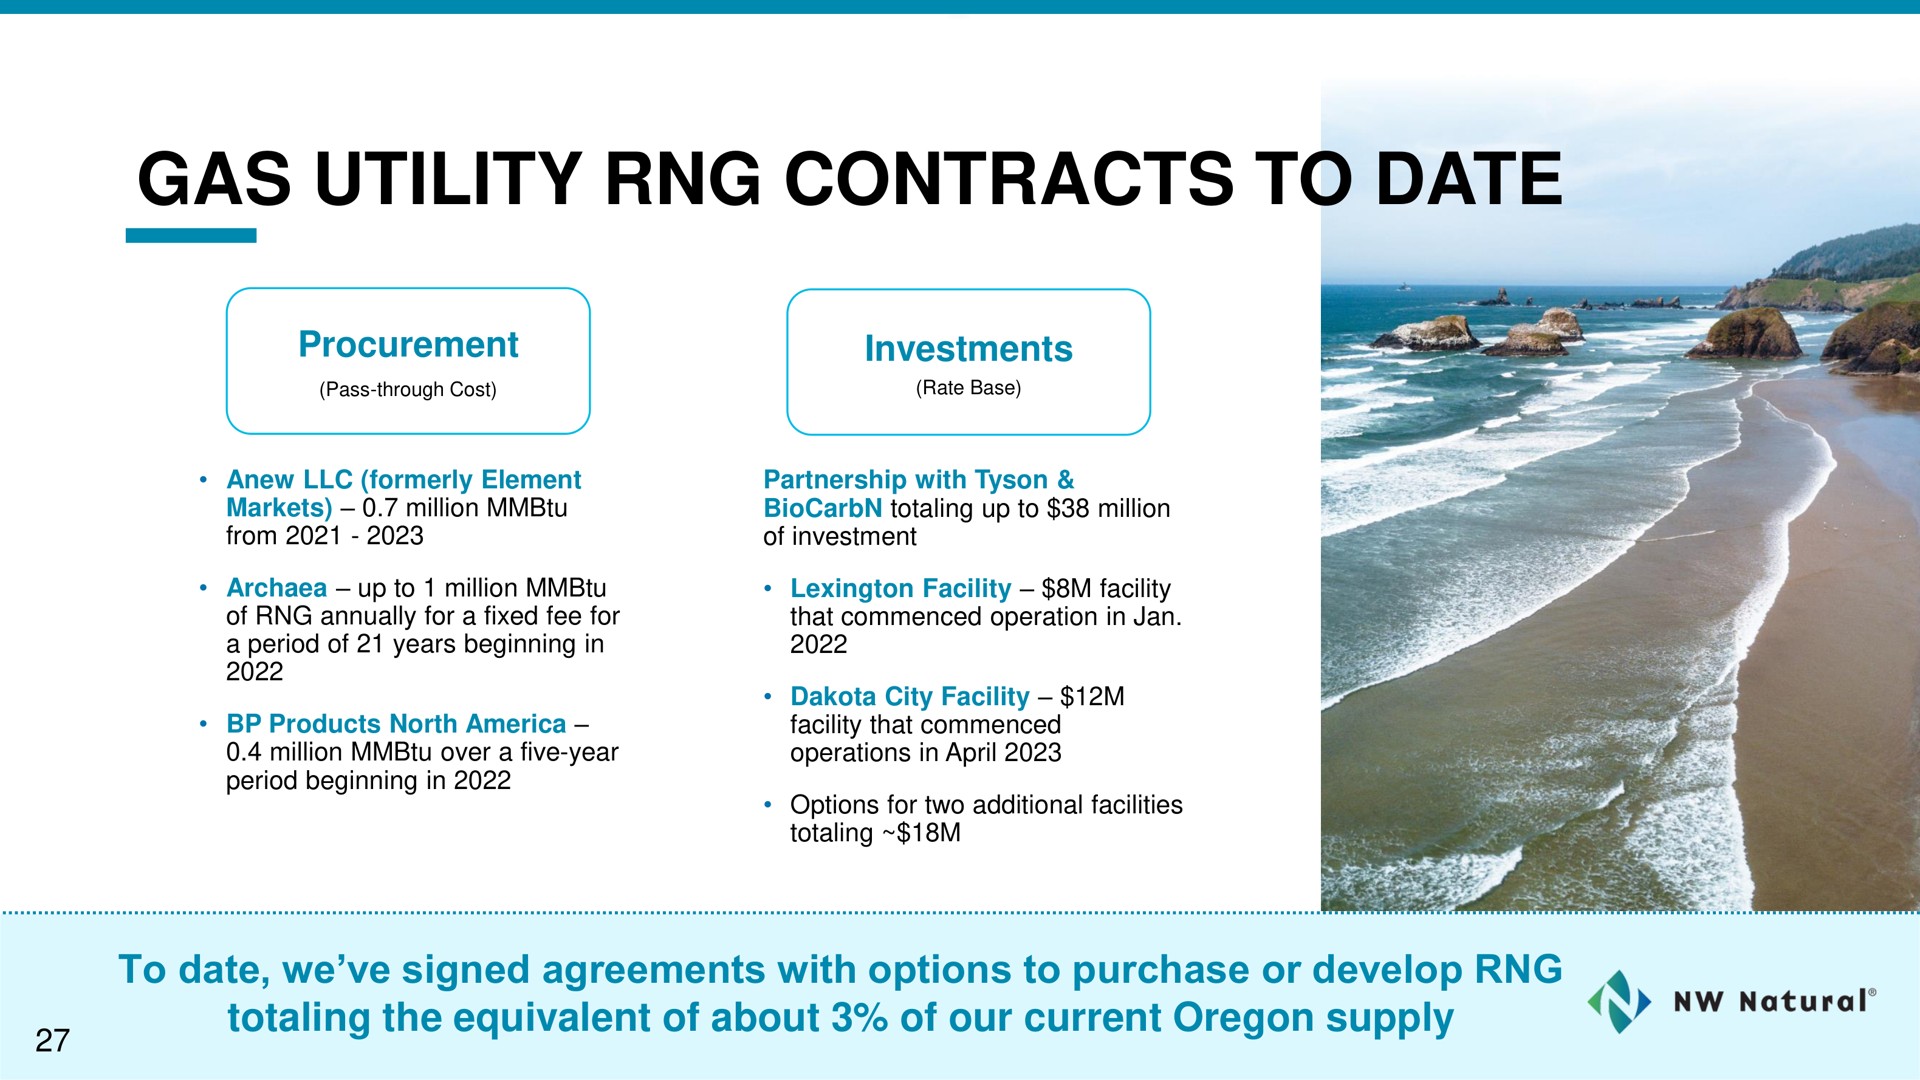 gas utility contracts to date | NW Natural Holdings